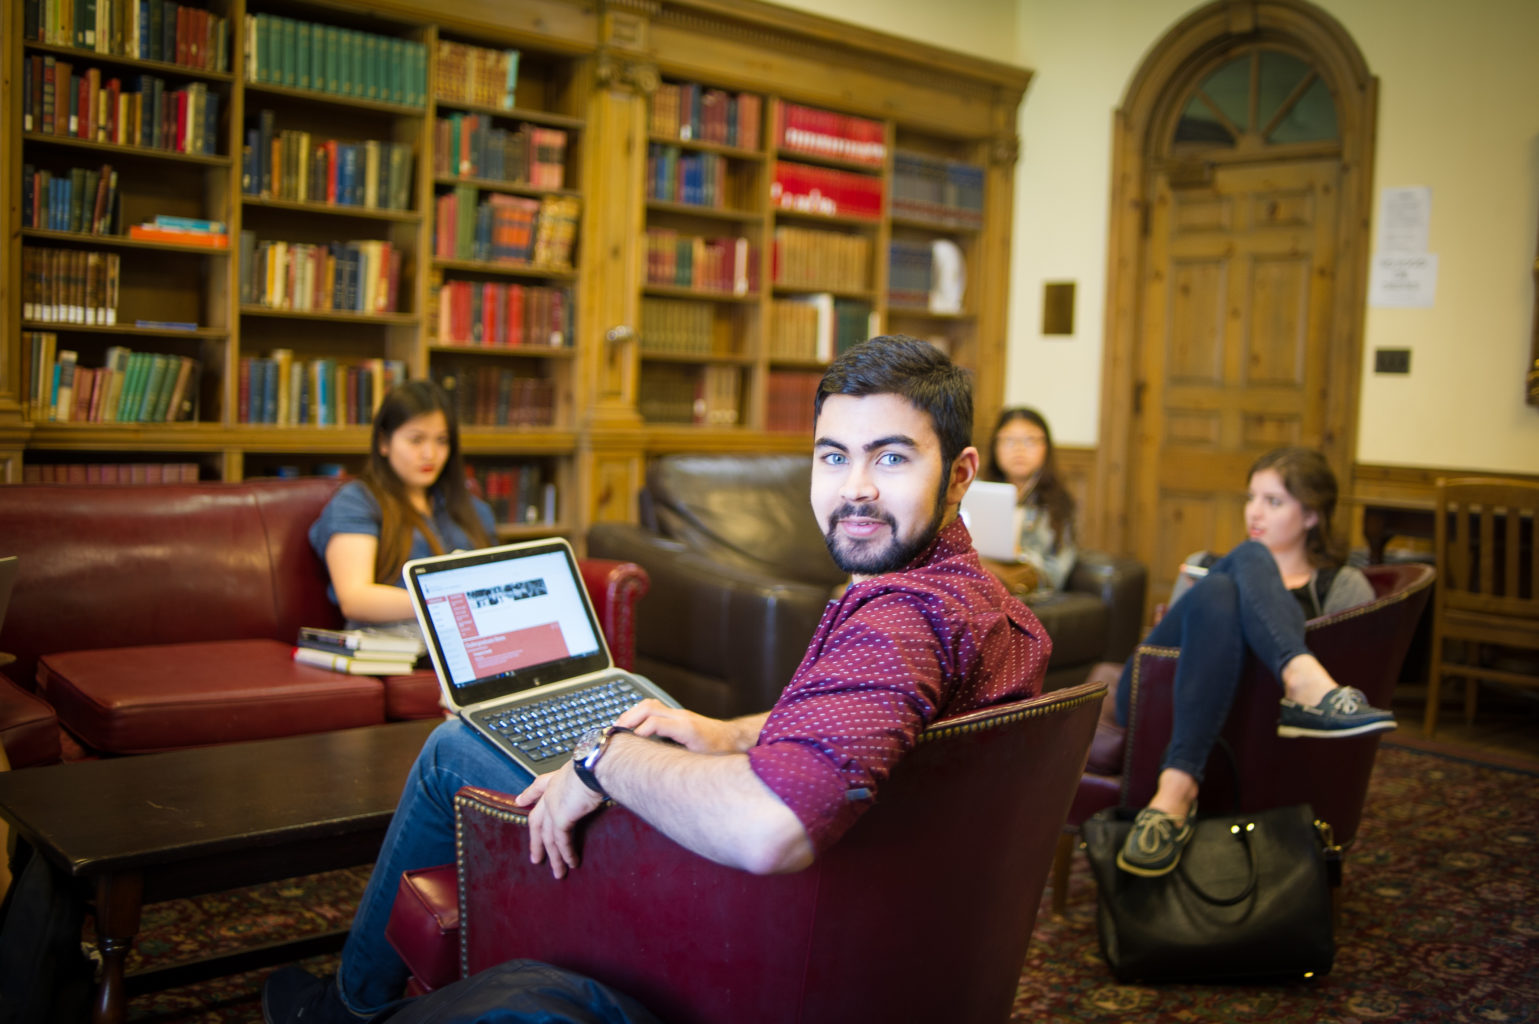 Student looks at the camera while other students are studying in the Stedman Library in St. Hilda's College